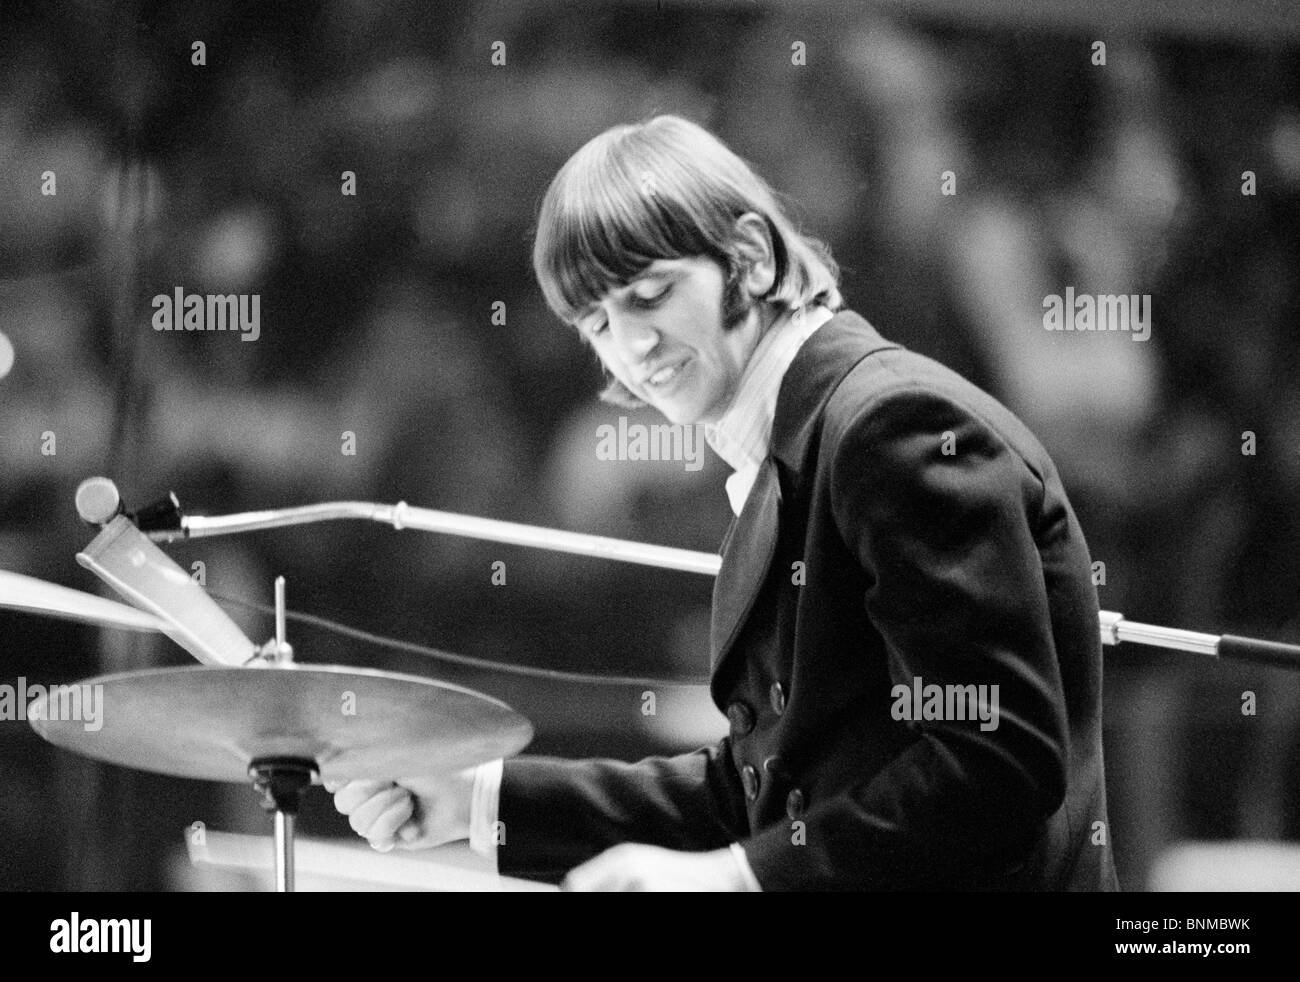 The Beatles music pop group band concert Germany Essen 1966 Ringo Starr drummer Stock Photo